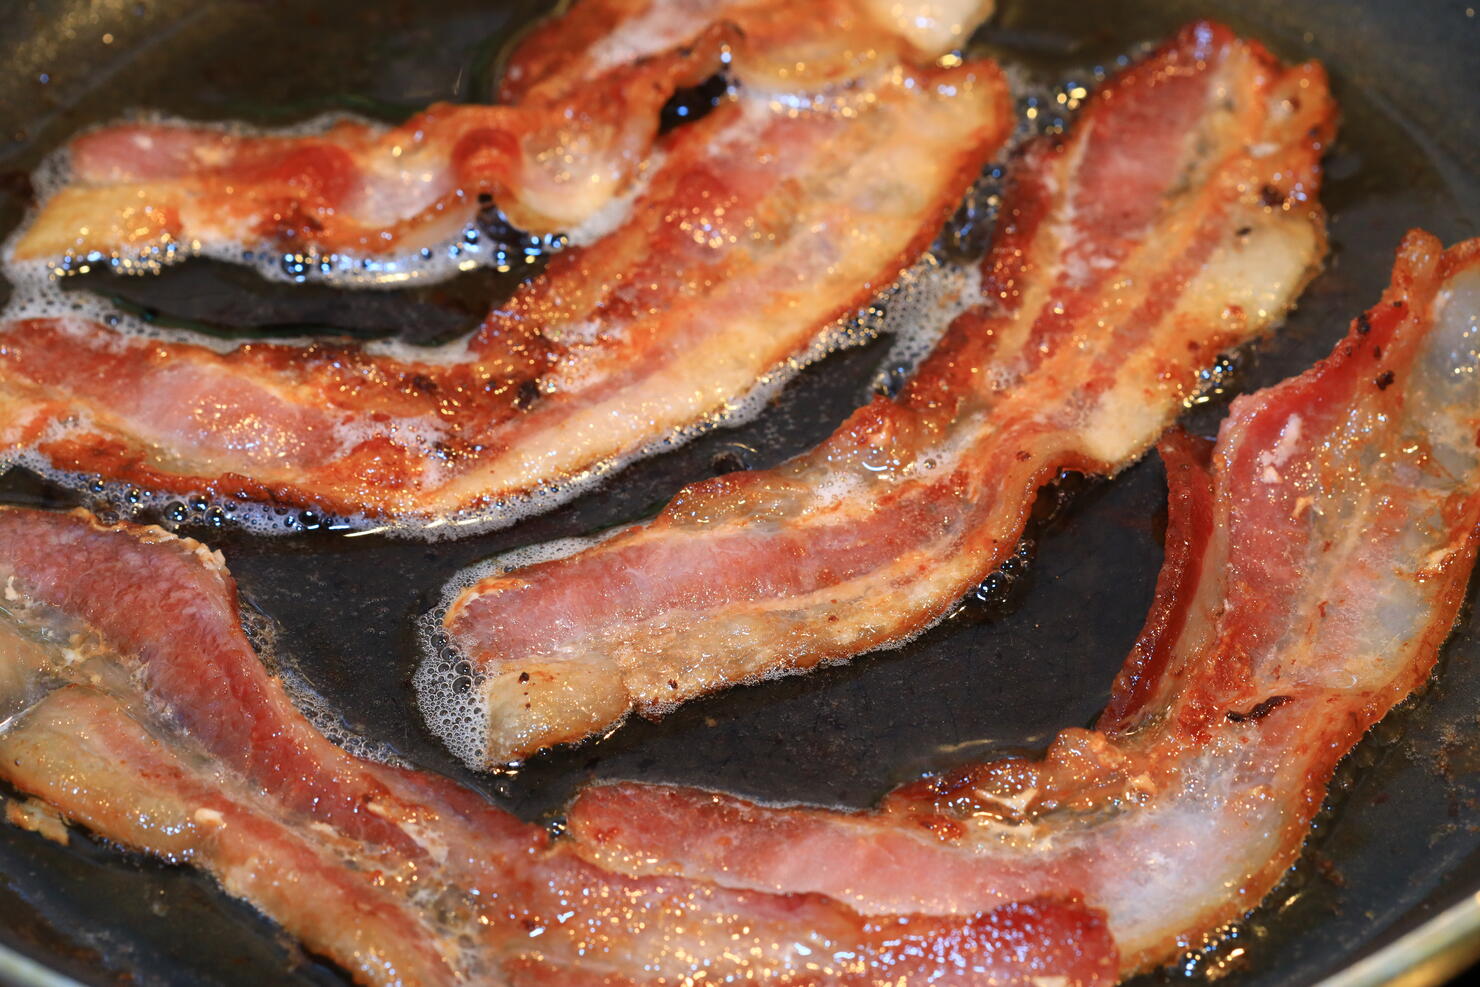 Sizzling Bacon in the frying pan